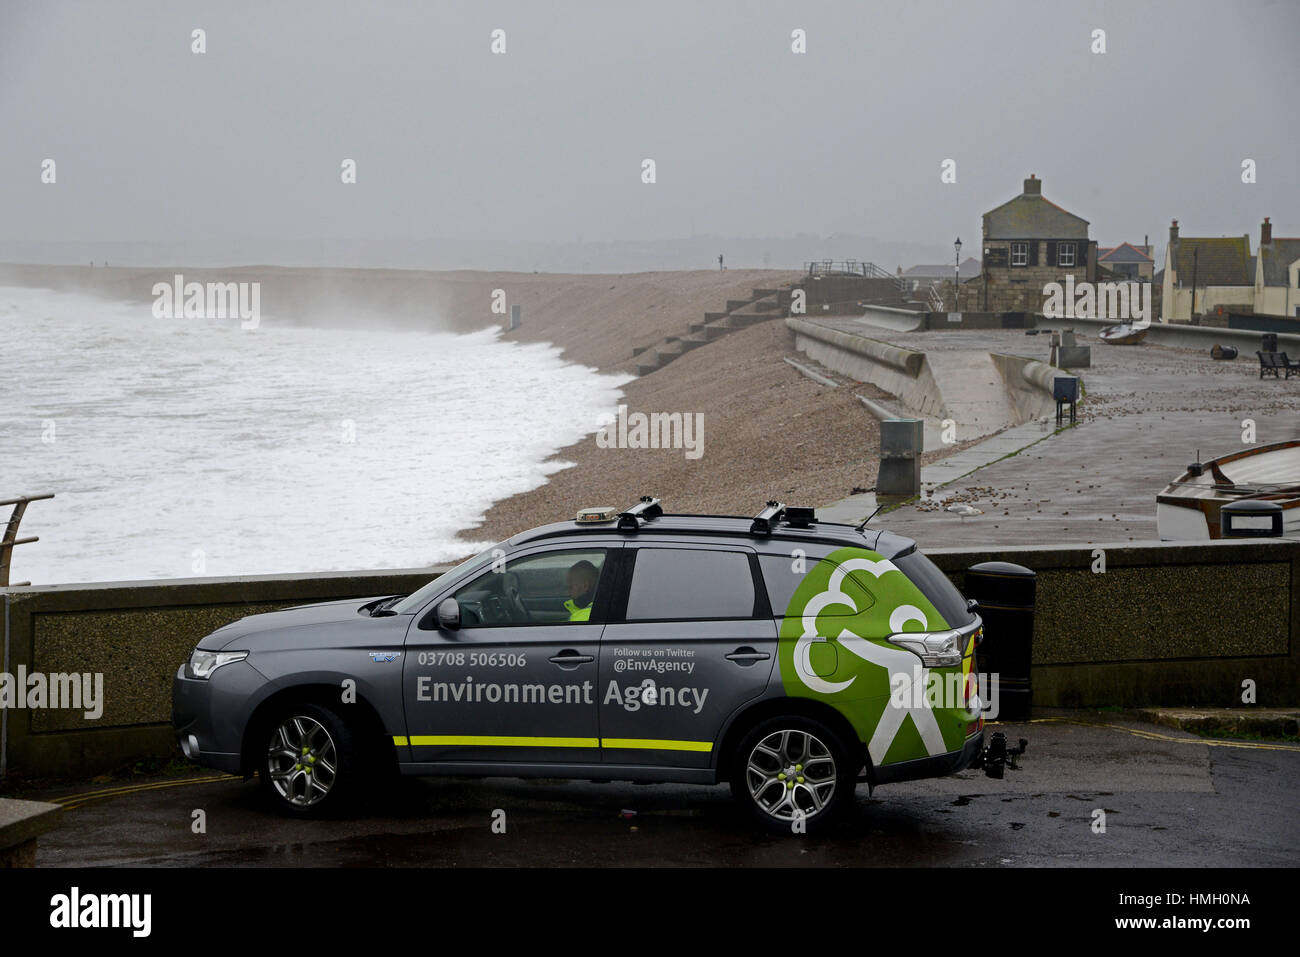 Portland, Dorset, UK. 3rd February 2017. Environment Agency at Chiswell, Portland Credit: Dorset Media Service/Alamy Live News Stock Photo